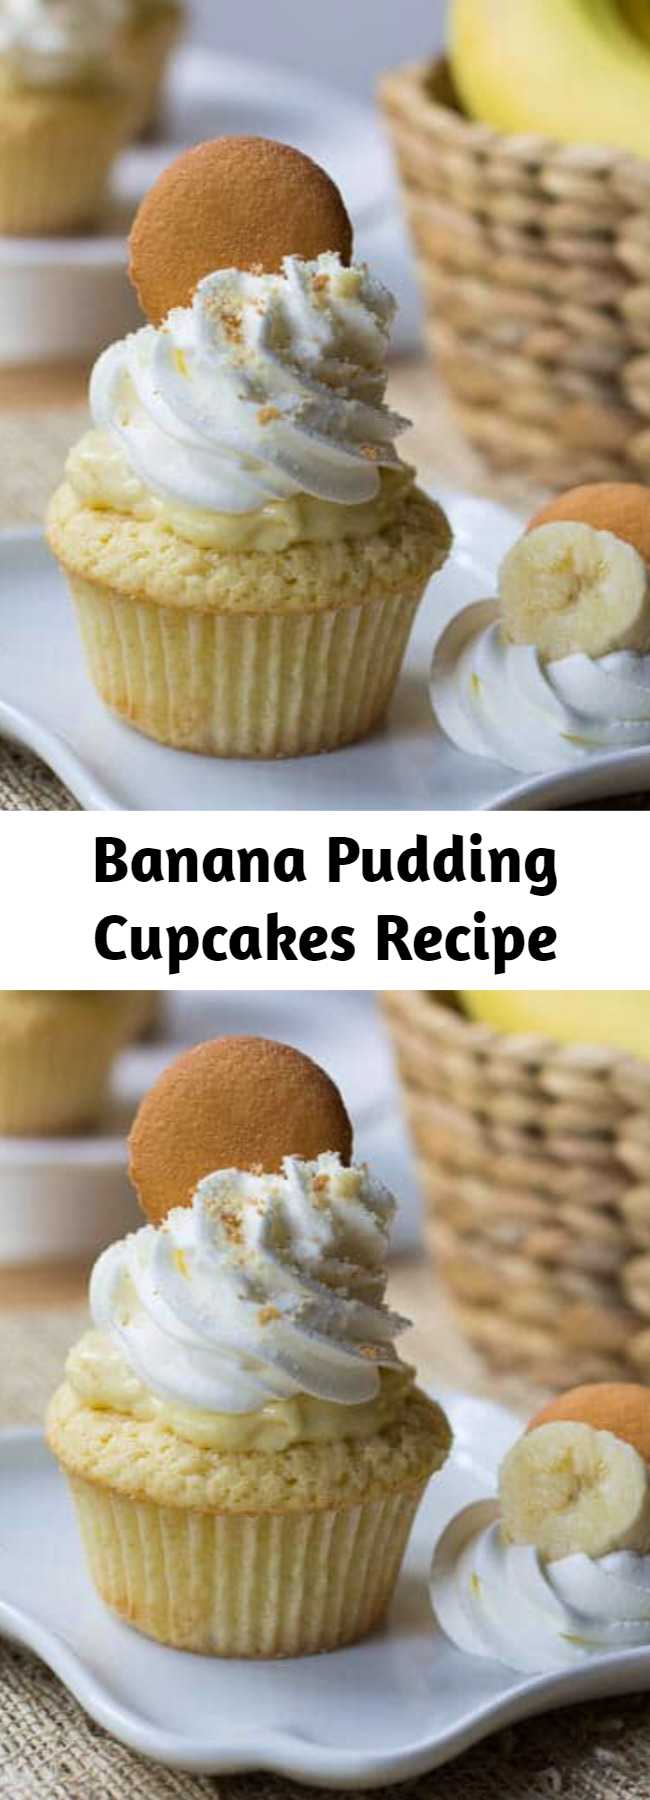 The cupcake version of banana pudding with a creamy pudding center, whipped topping and crushed vanilla wafers.